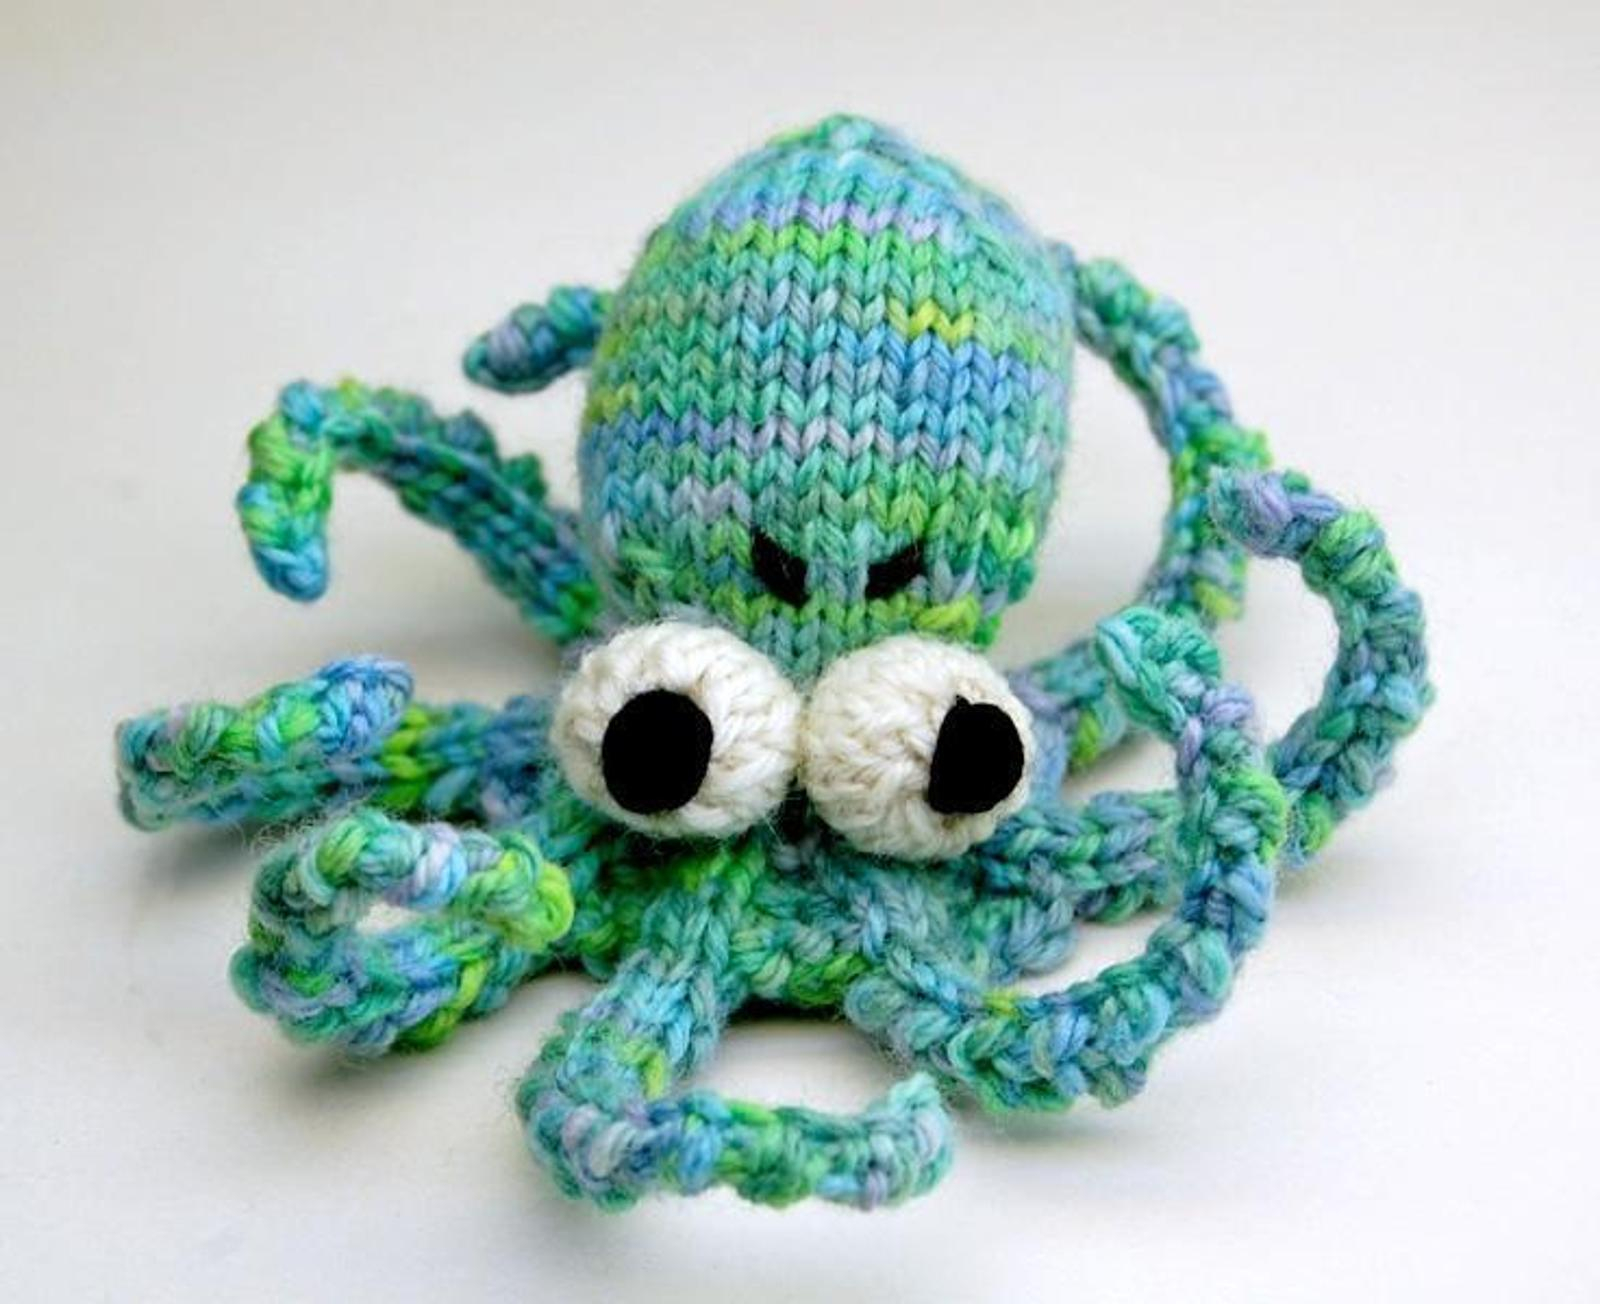 Octopus Knitting Pattern The Knit Octopus For Babies The Latest And Greatest Way To Give Back